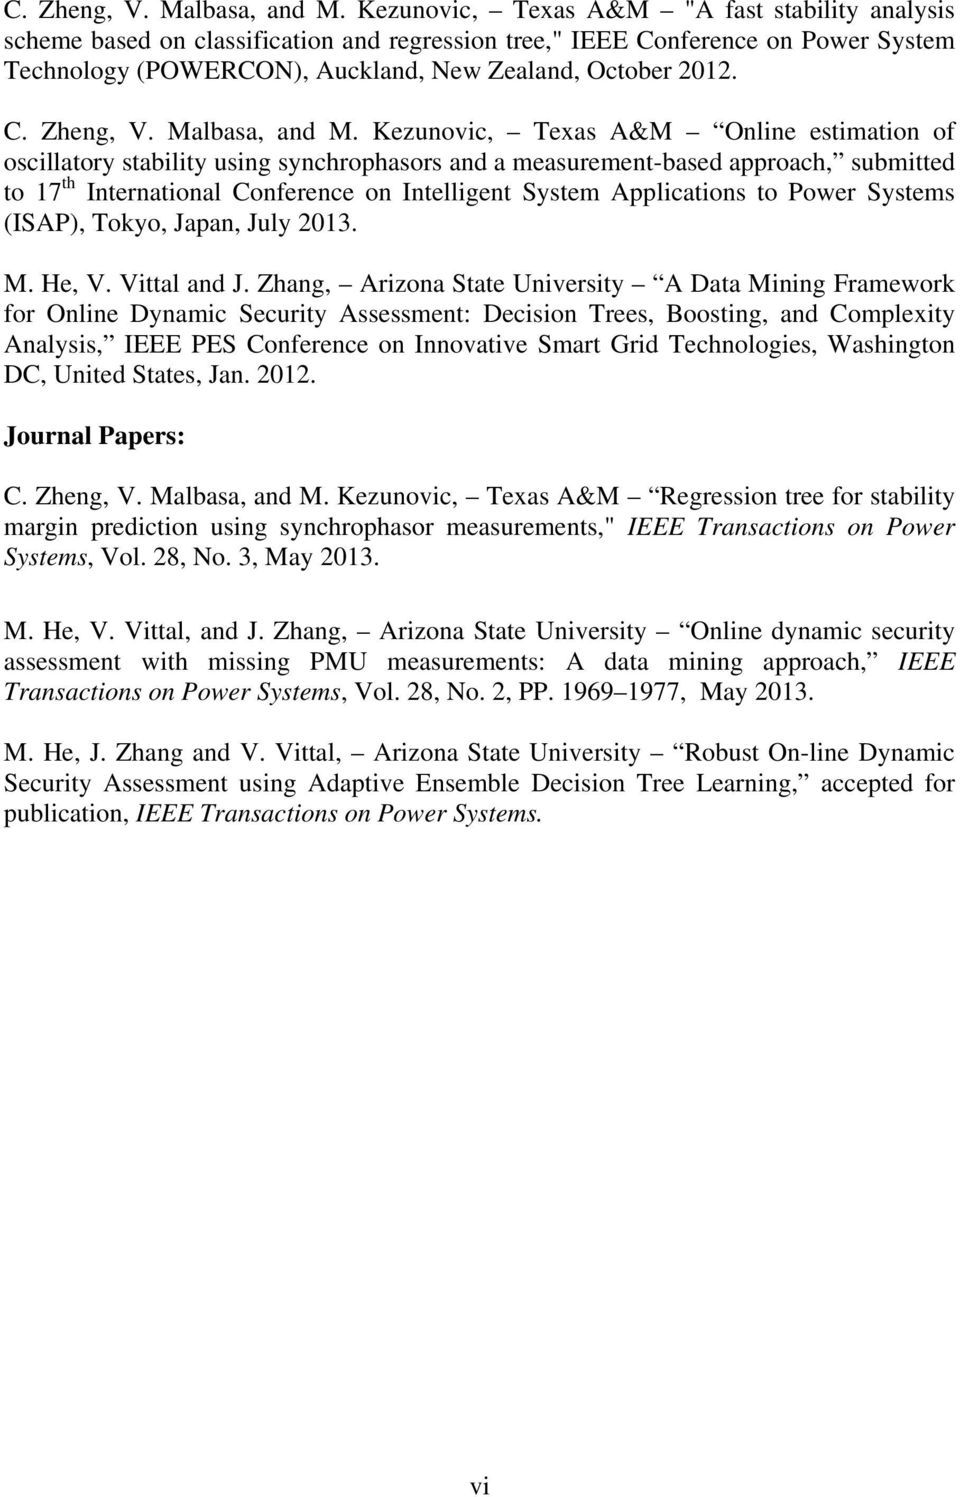 Kezunovic, Texas A&M Online estimation of oscillatory stability using synchrophasors and a measurement-based approach, submitted to 17 th International Conference on Intelligent System Applications